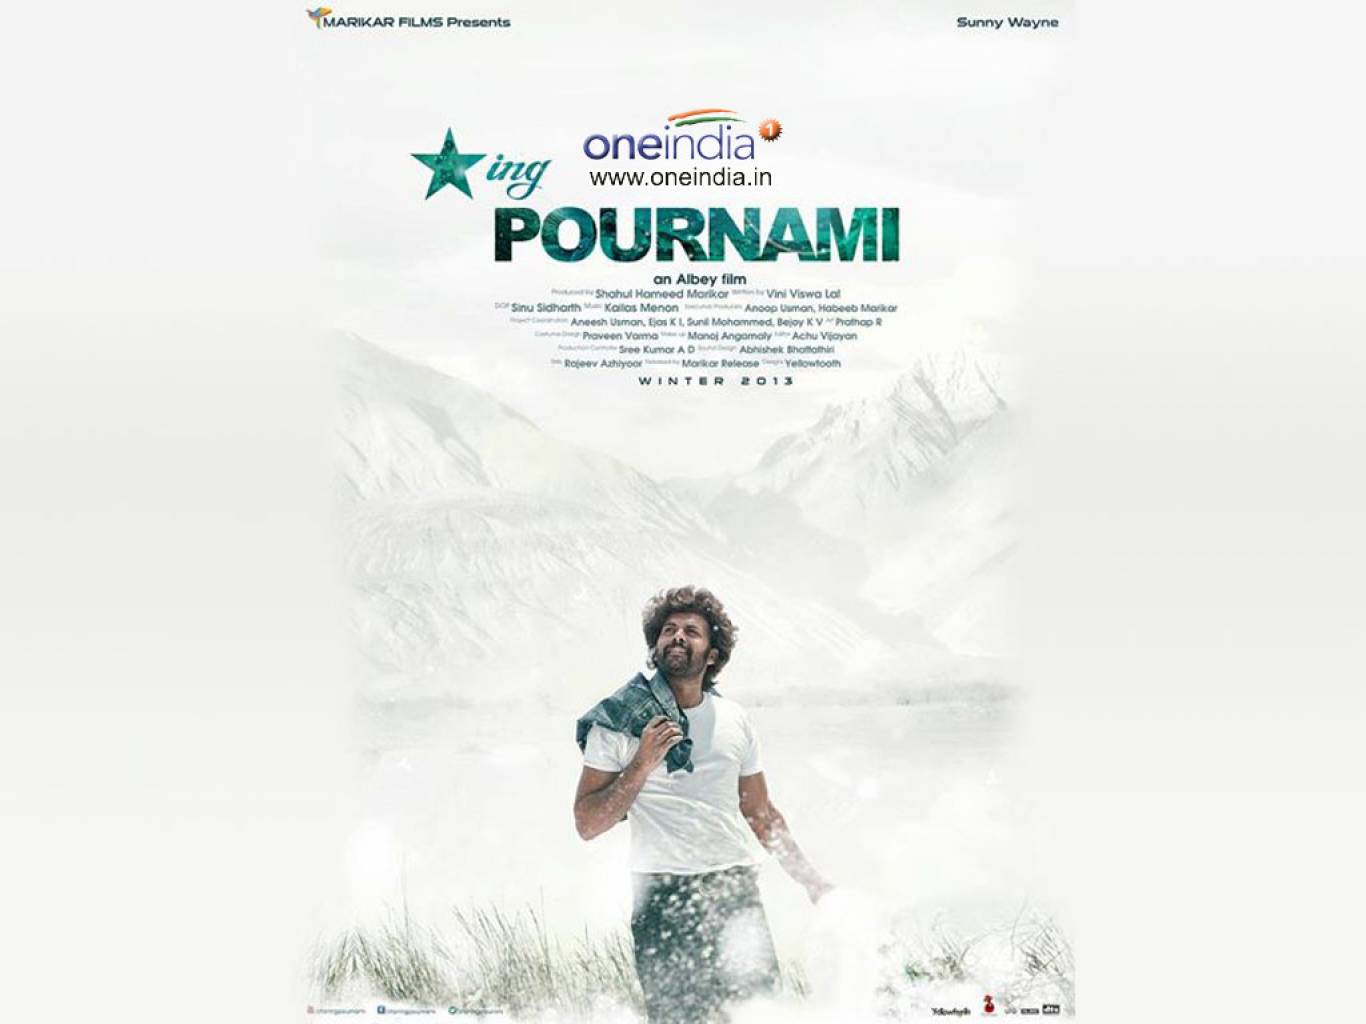 Starring Pournami Wallpapers - Malayalam Movie Poster Designs - 1366x1024  Wallpaper 